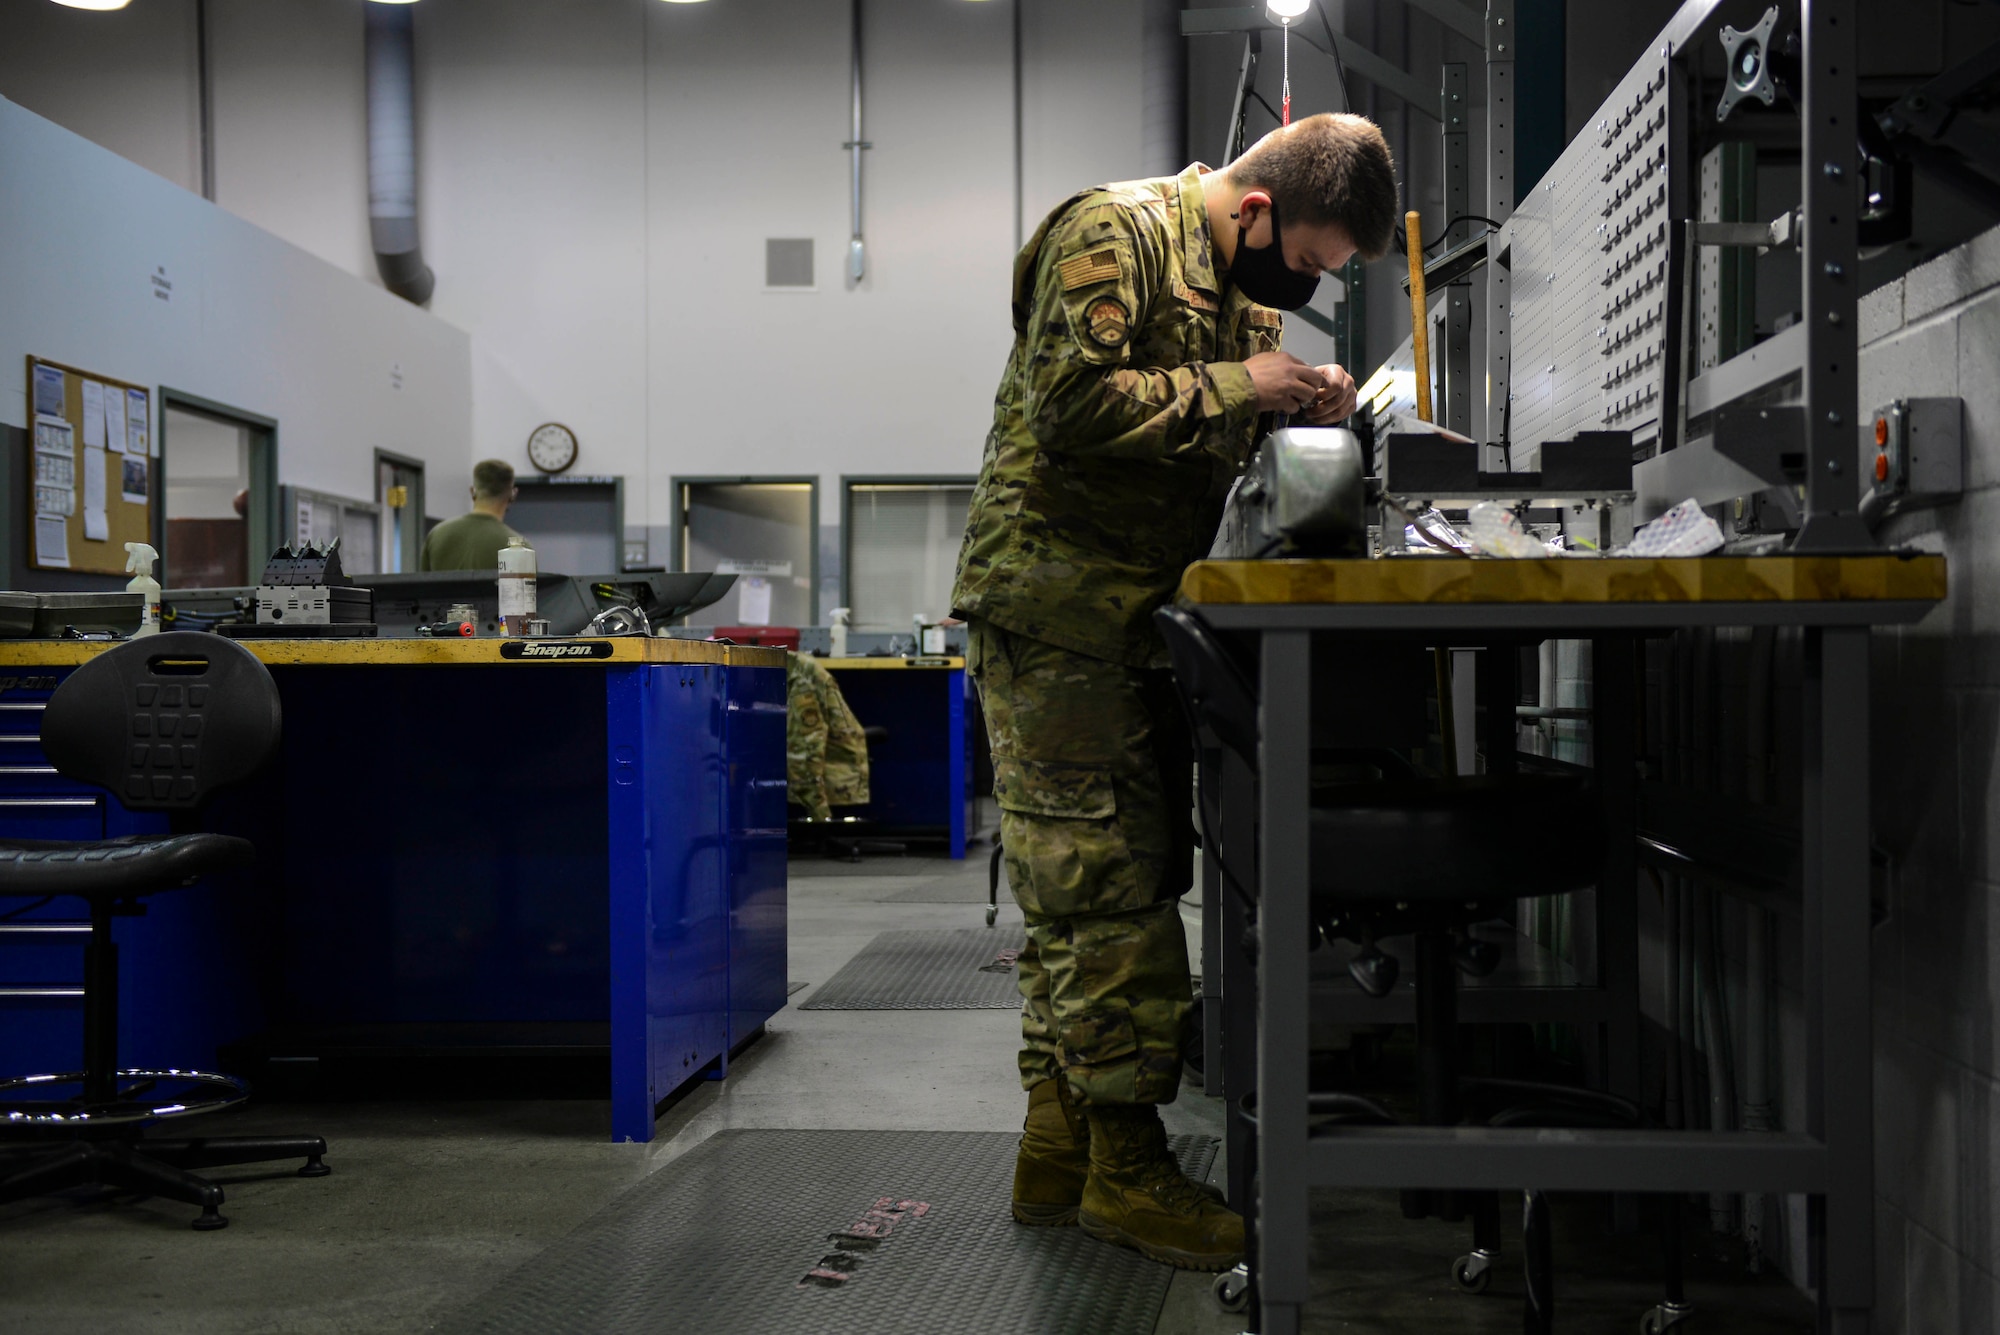 U.S. Air Force Airman 1st Class Koby Gossett, a 354th Maintenance Squadron (MXS) armament floor technician, replaces a wire at Eielson Air Force Base, Oct. 7, 2020.